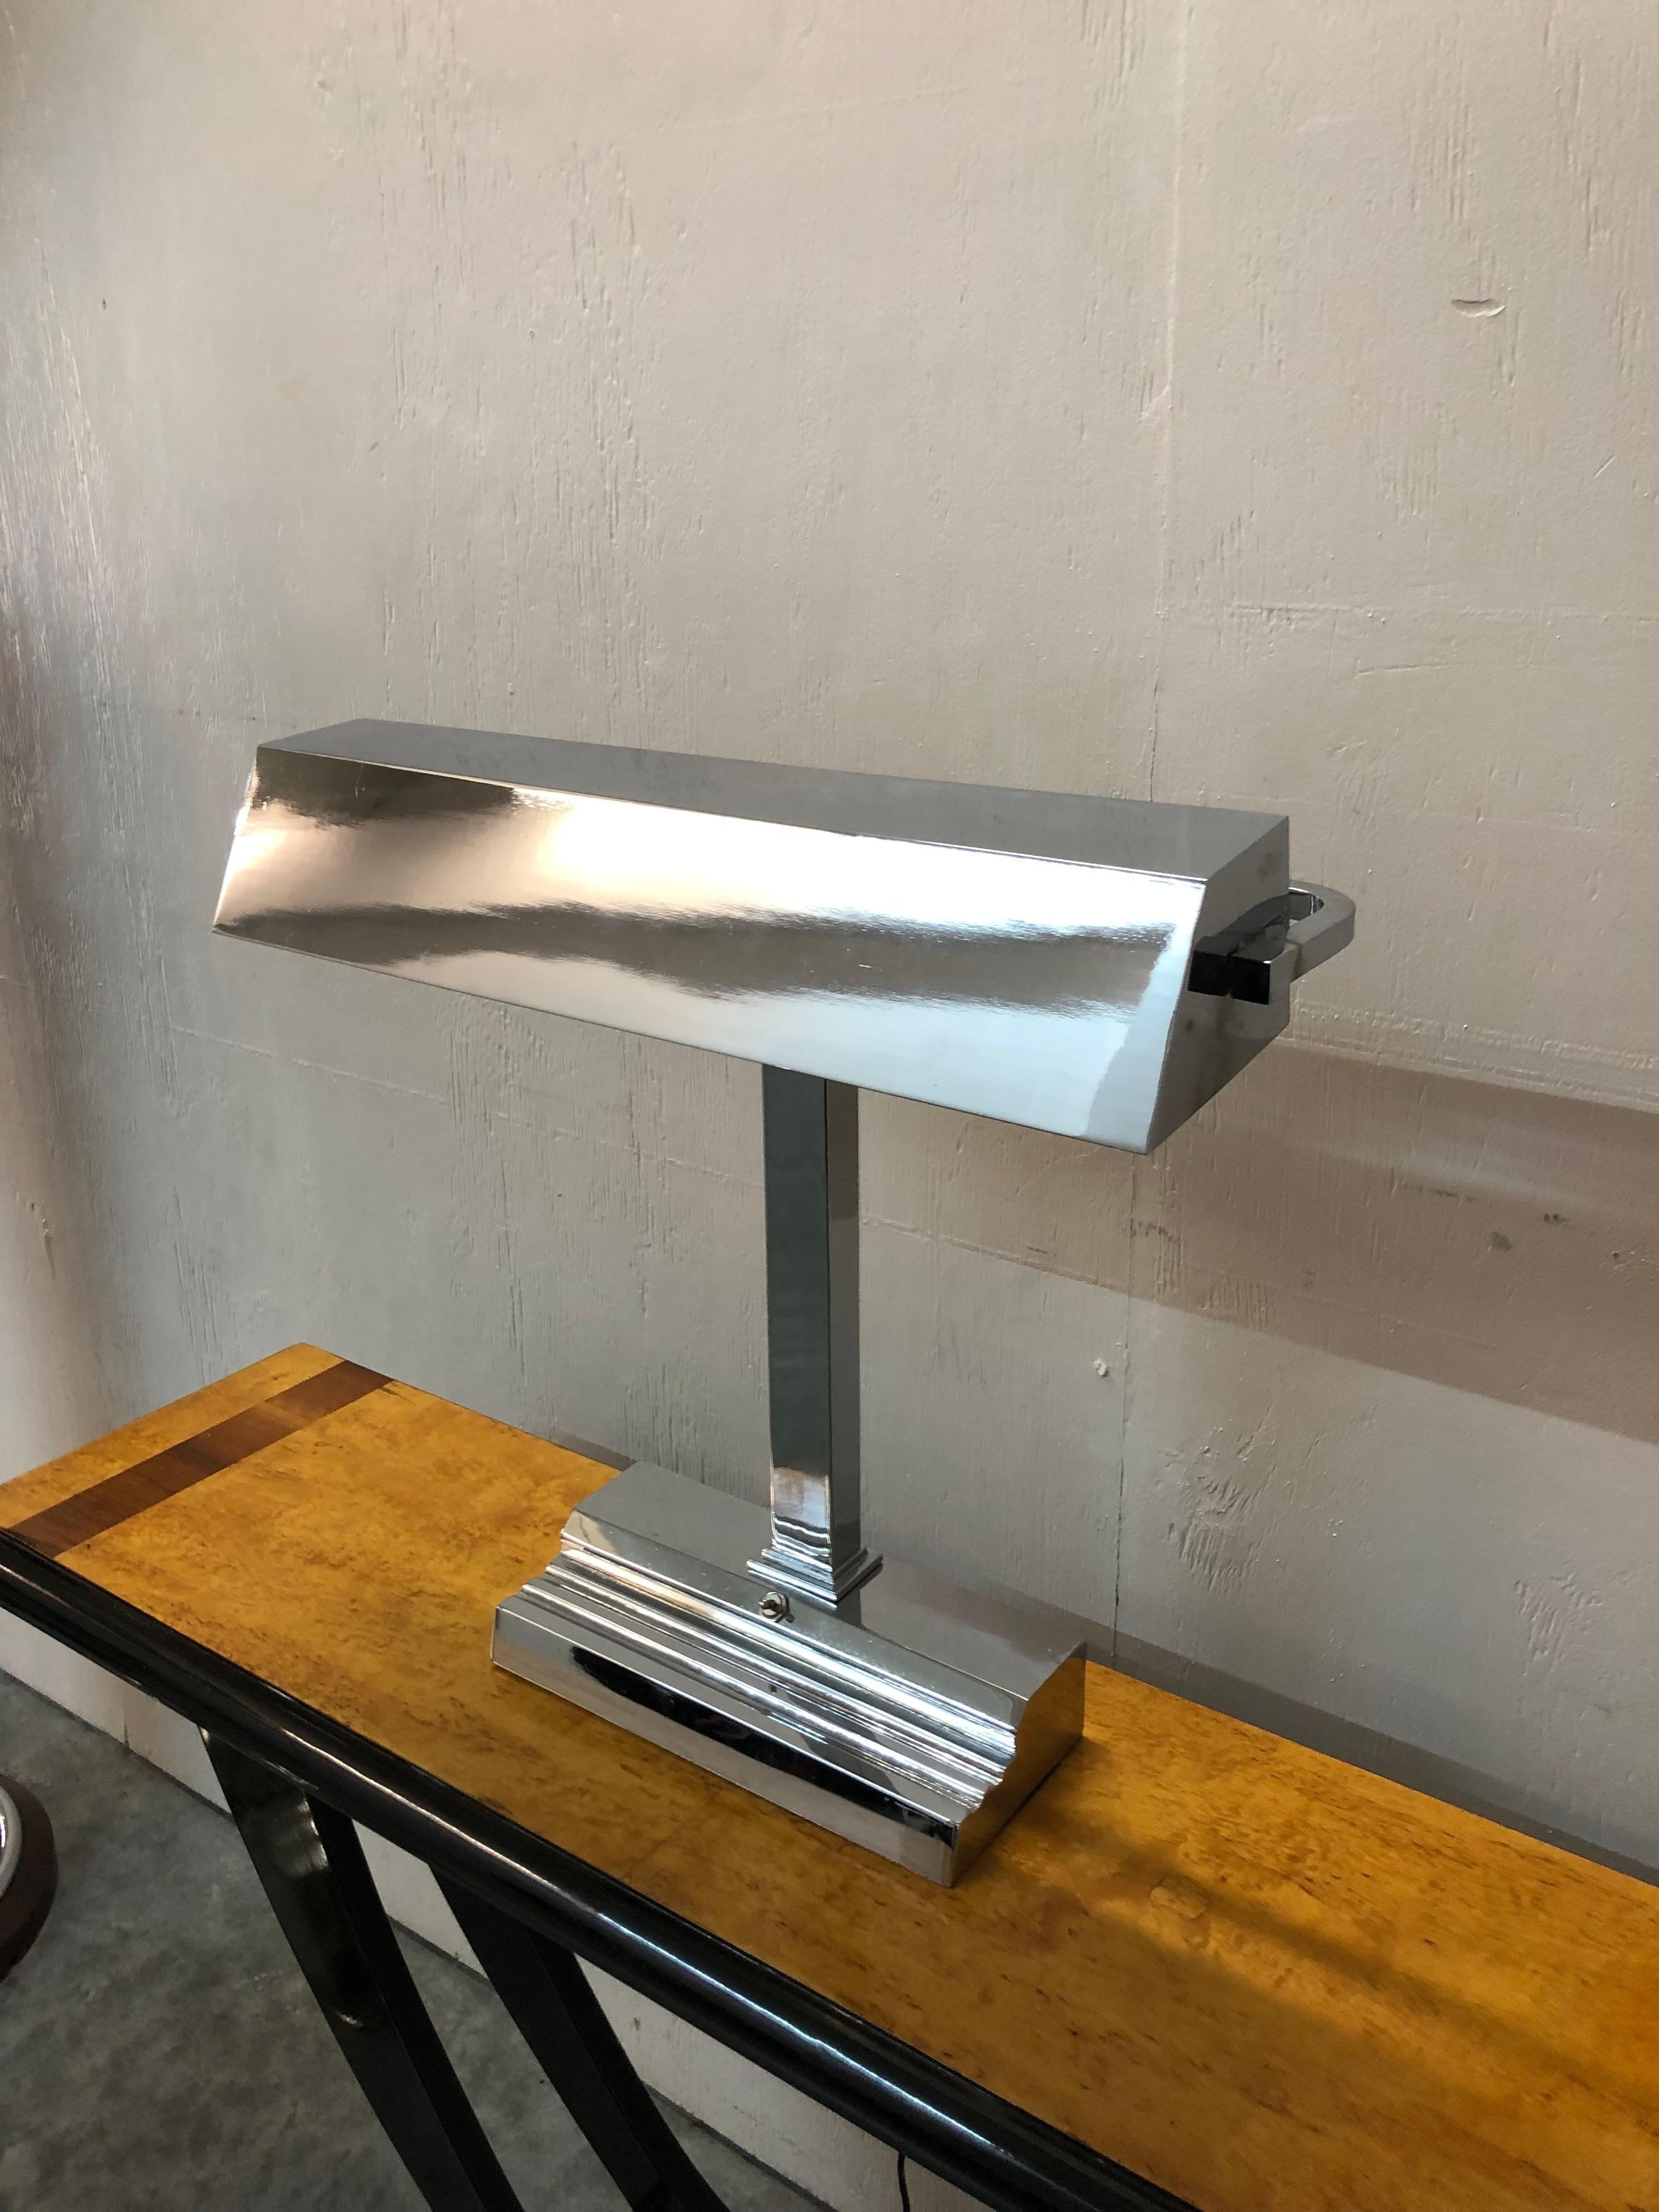 Desk lamp Art deco.

Materia: chromed bronze
Style: Art Deco
Country: German
To take care of your property and the lives of our customers, the new wiring has been done.
If you want to live in the golden years, this is the Desk lamp that your project